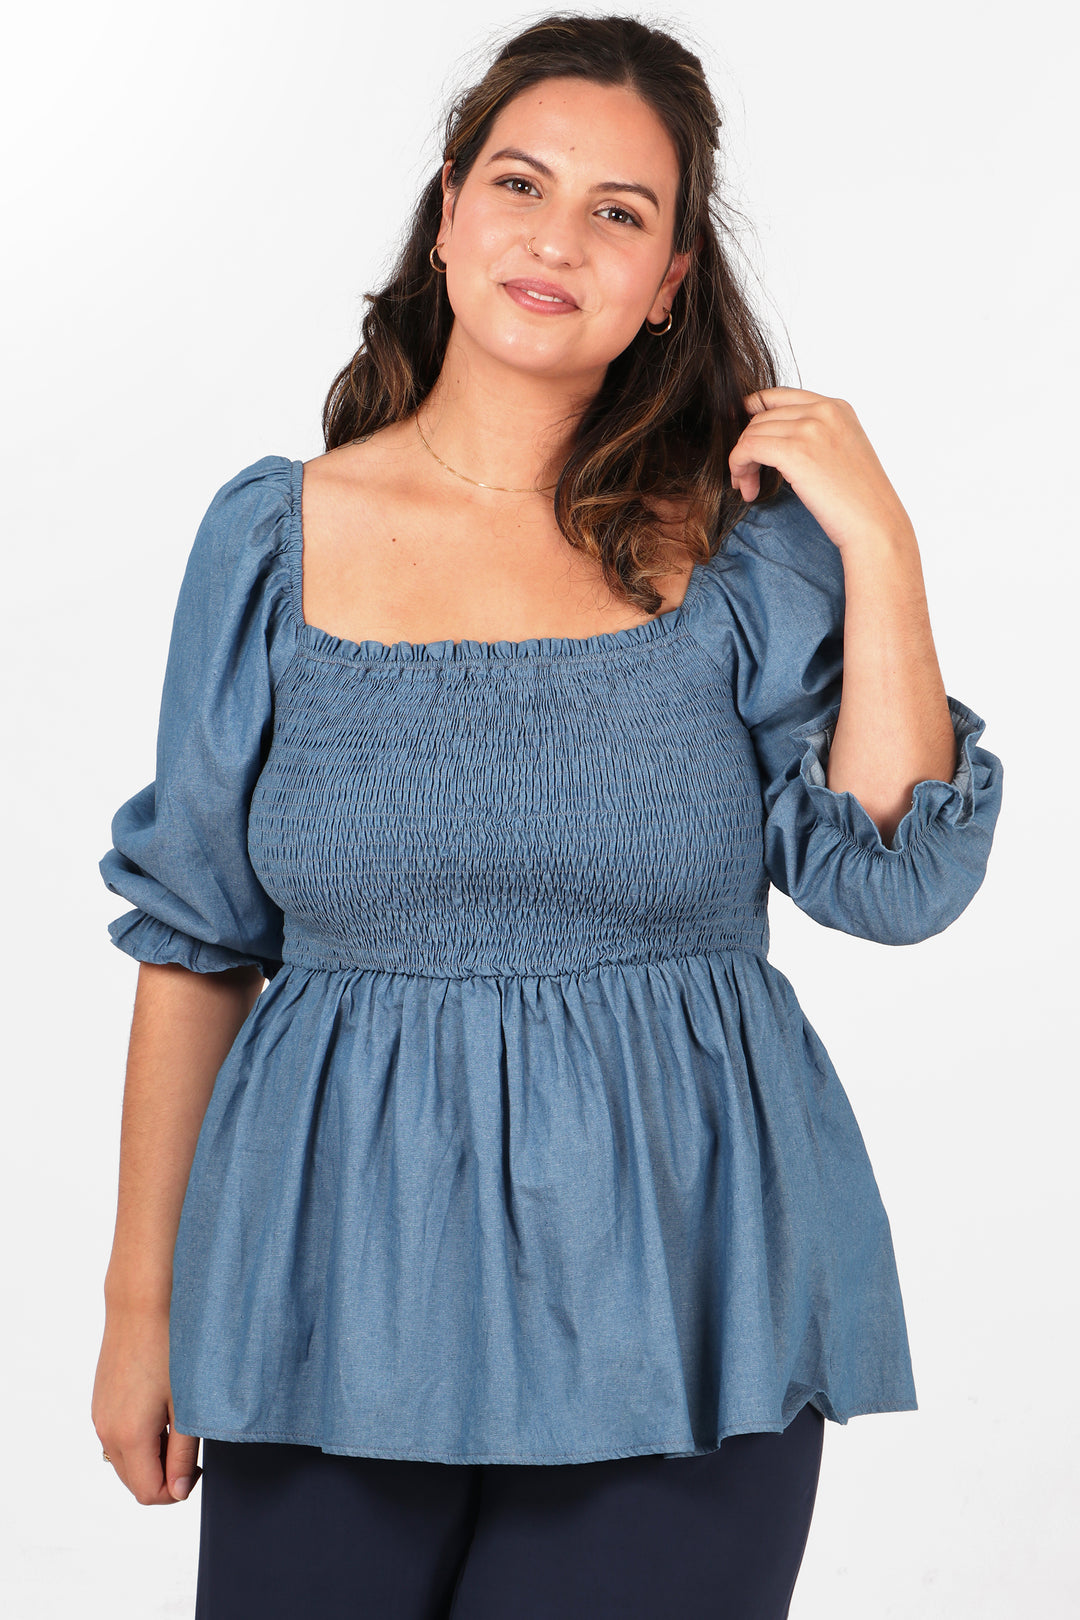 model wearing a blue denim look peplum top with a square neckline and shirred bodice